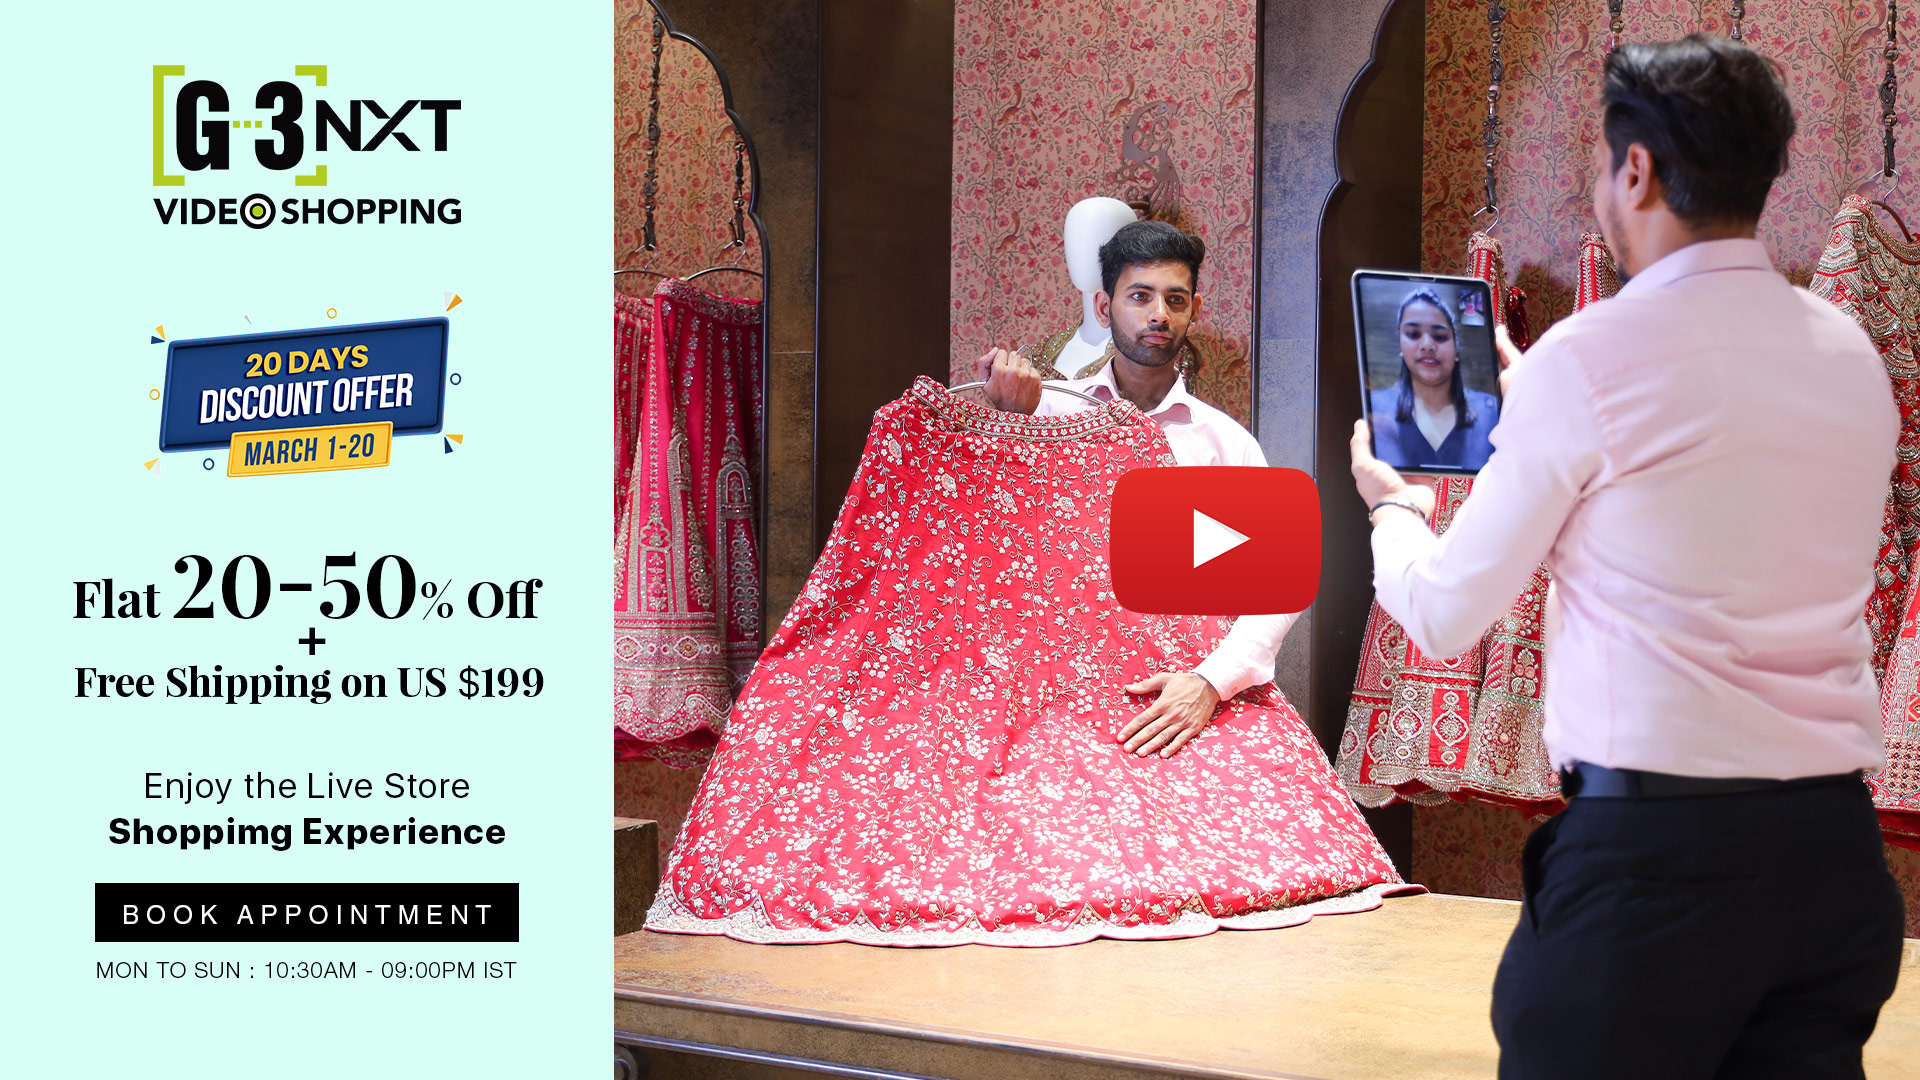 Women clothes - Shop via video call with G3NXT Video Shopping